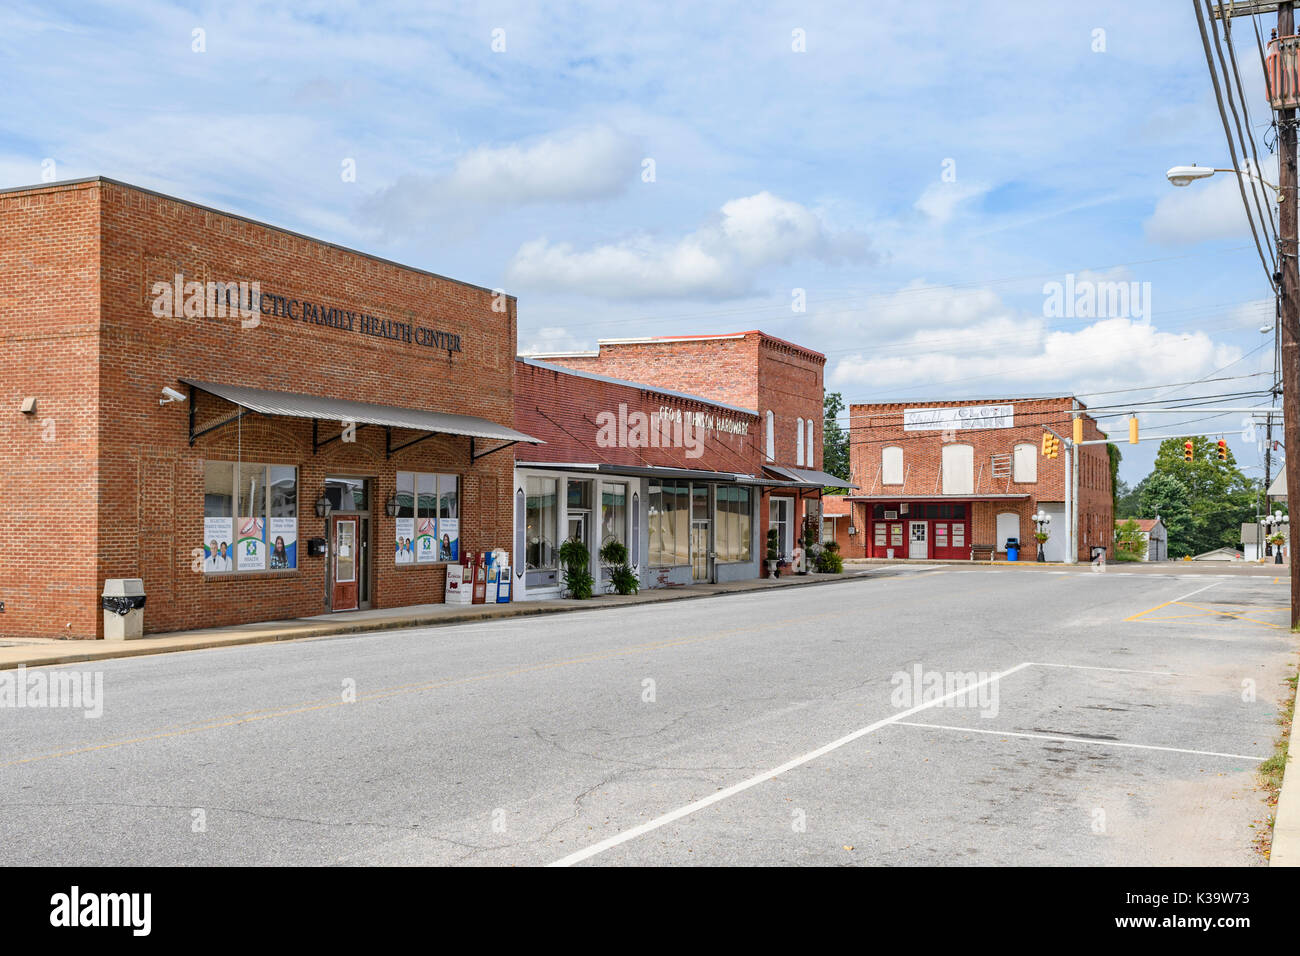 Empty downtown street in the small rural town of Eclectic Alabama, USA. Typical of small rural southern towns. Stock Photo